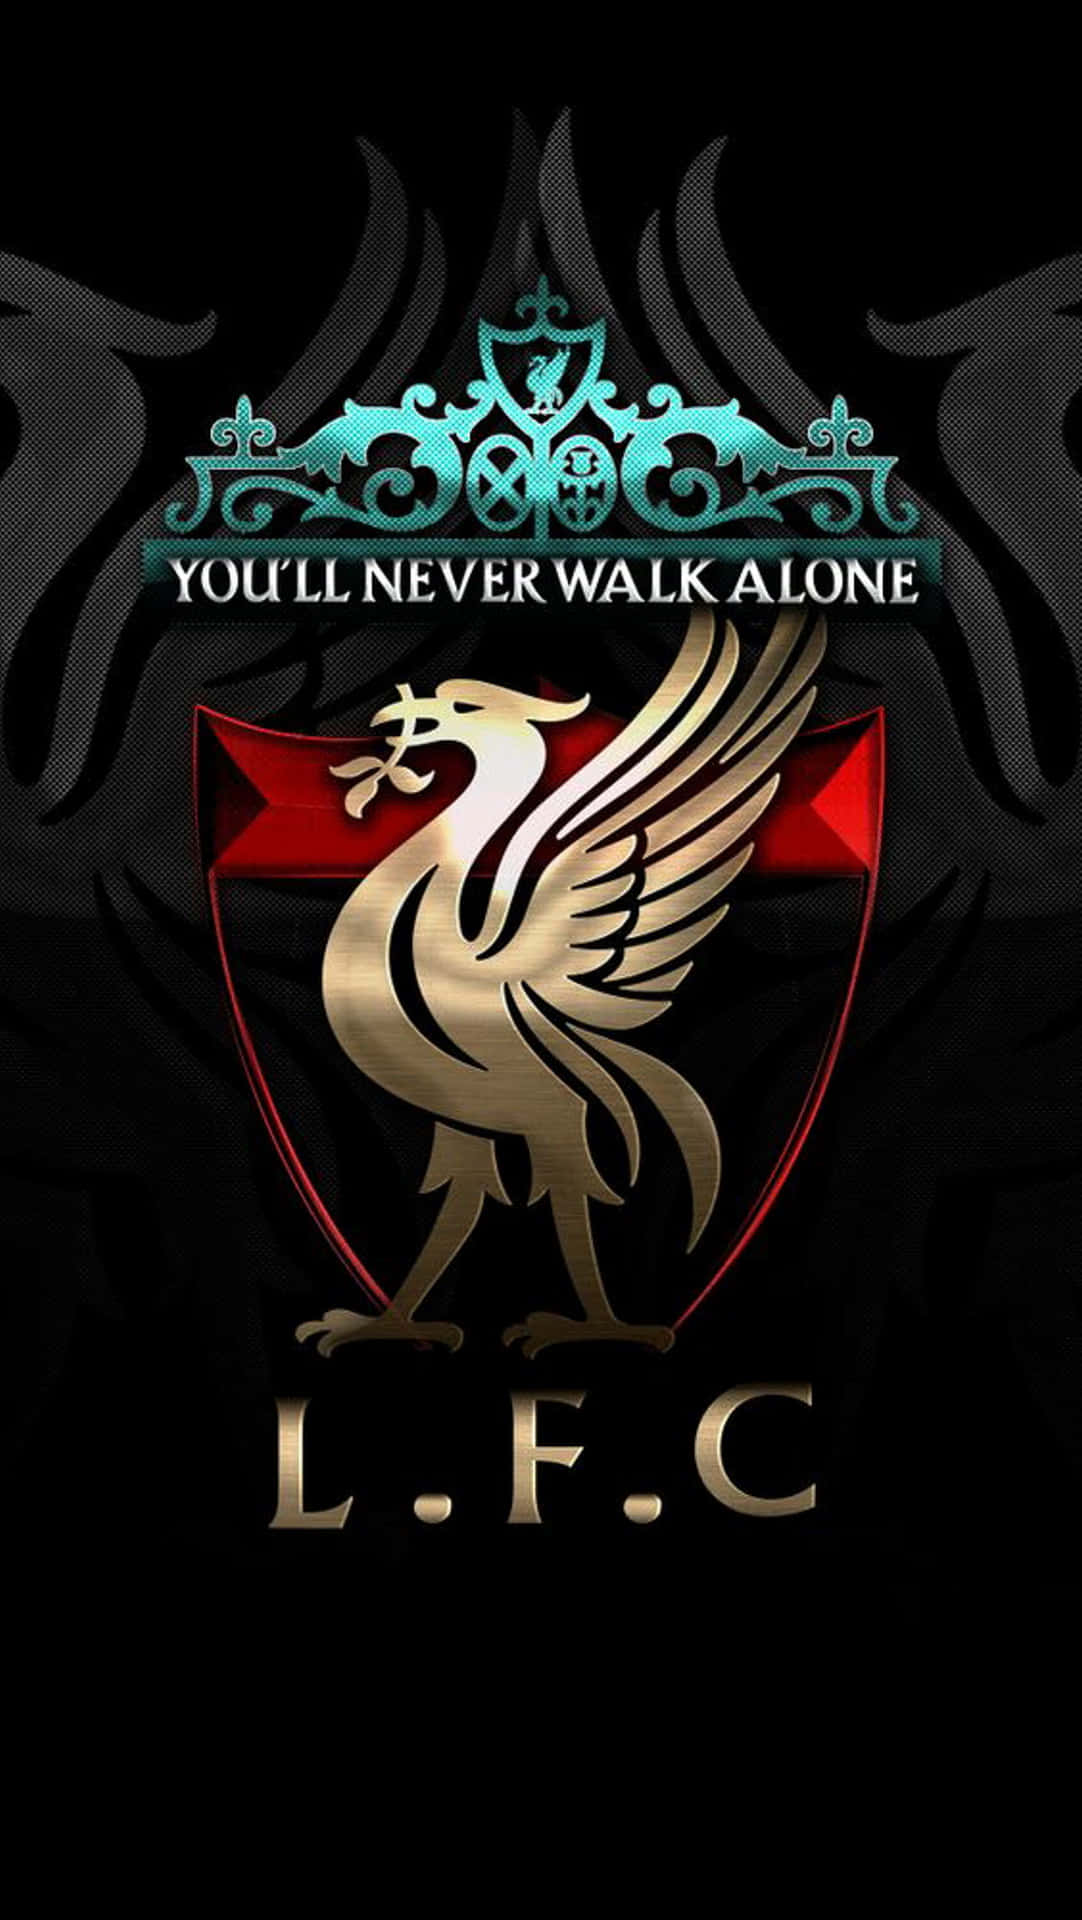 The official crest of England's Premier League club, Liverpool F.C. Wallpaper